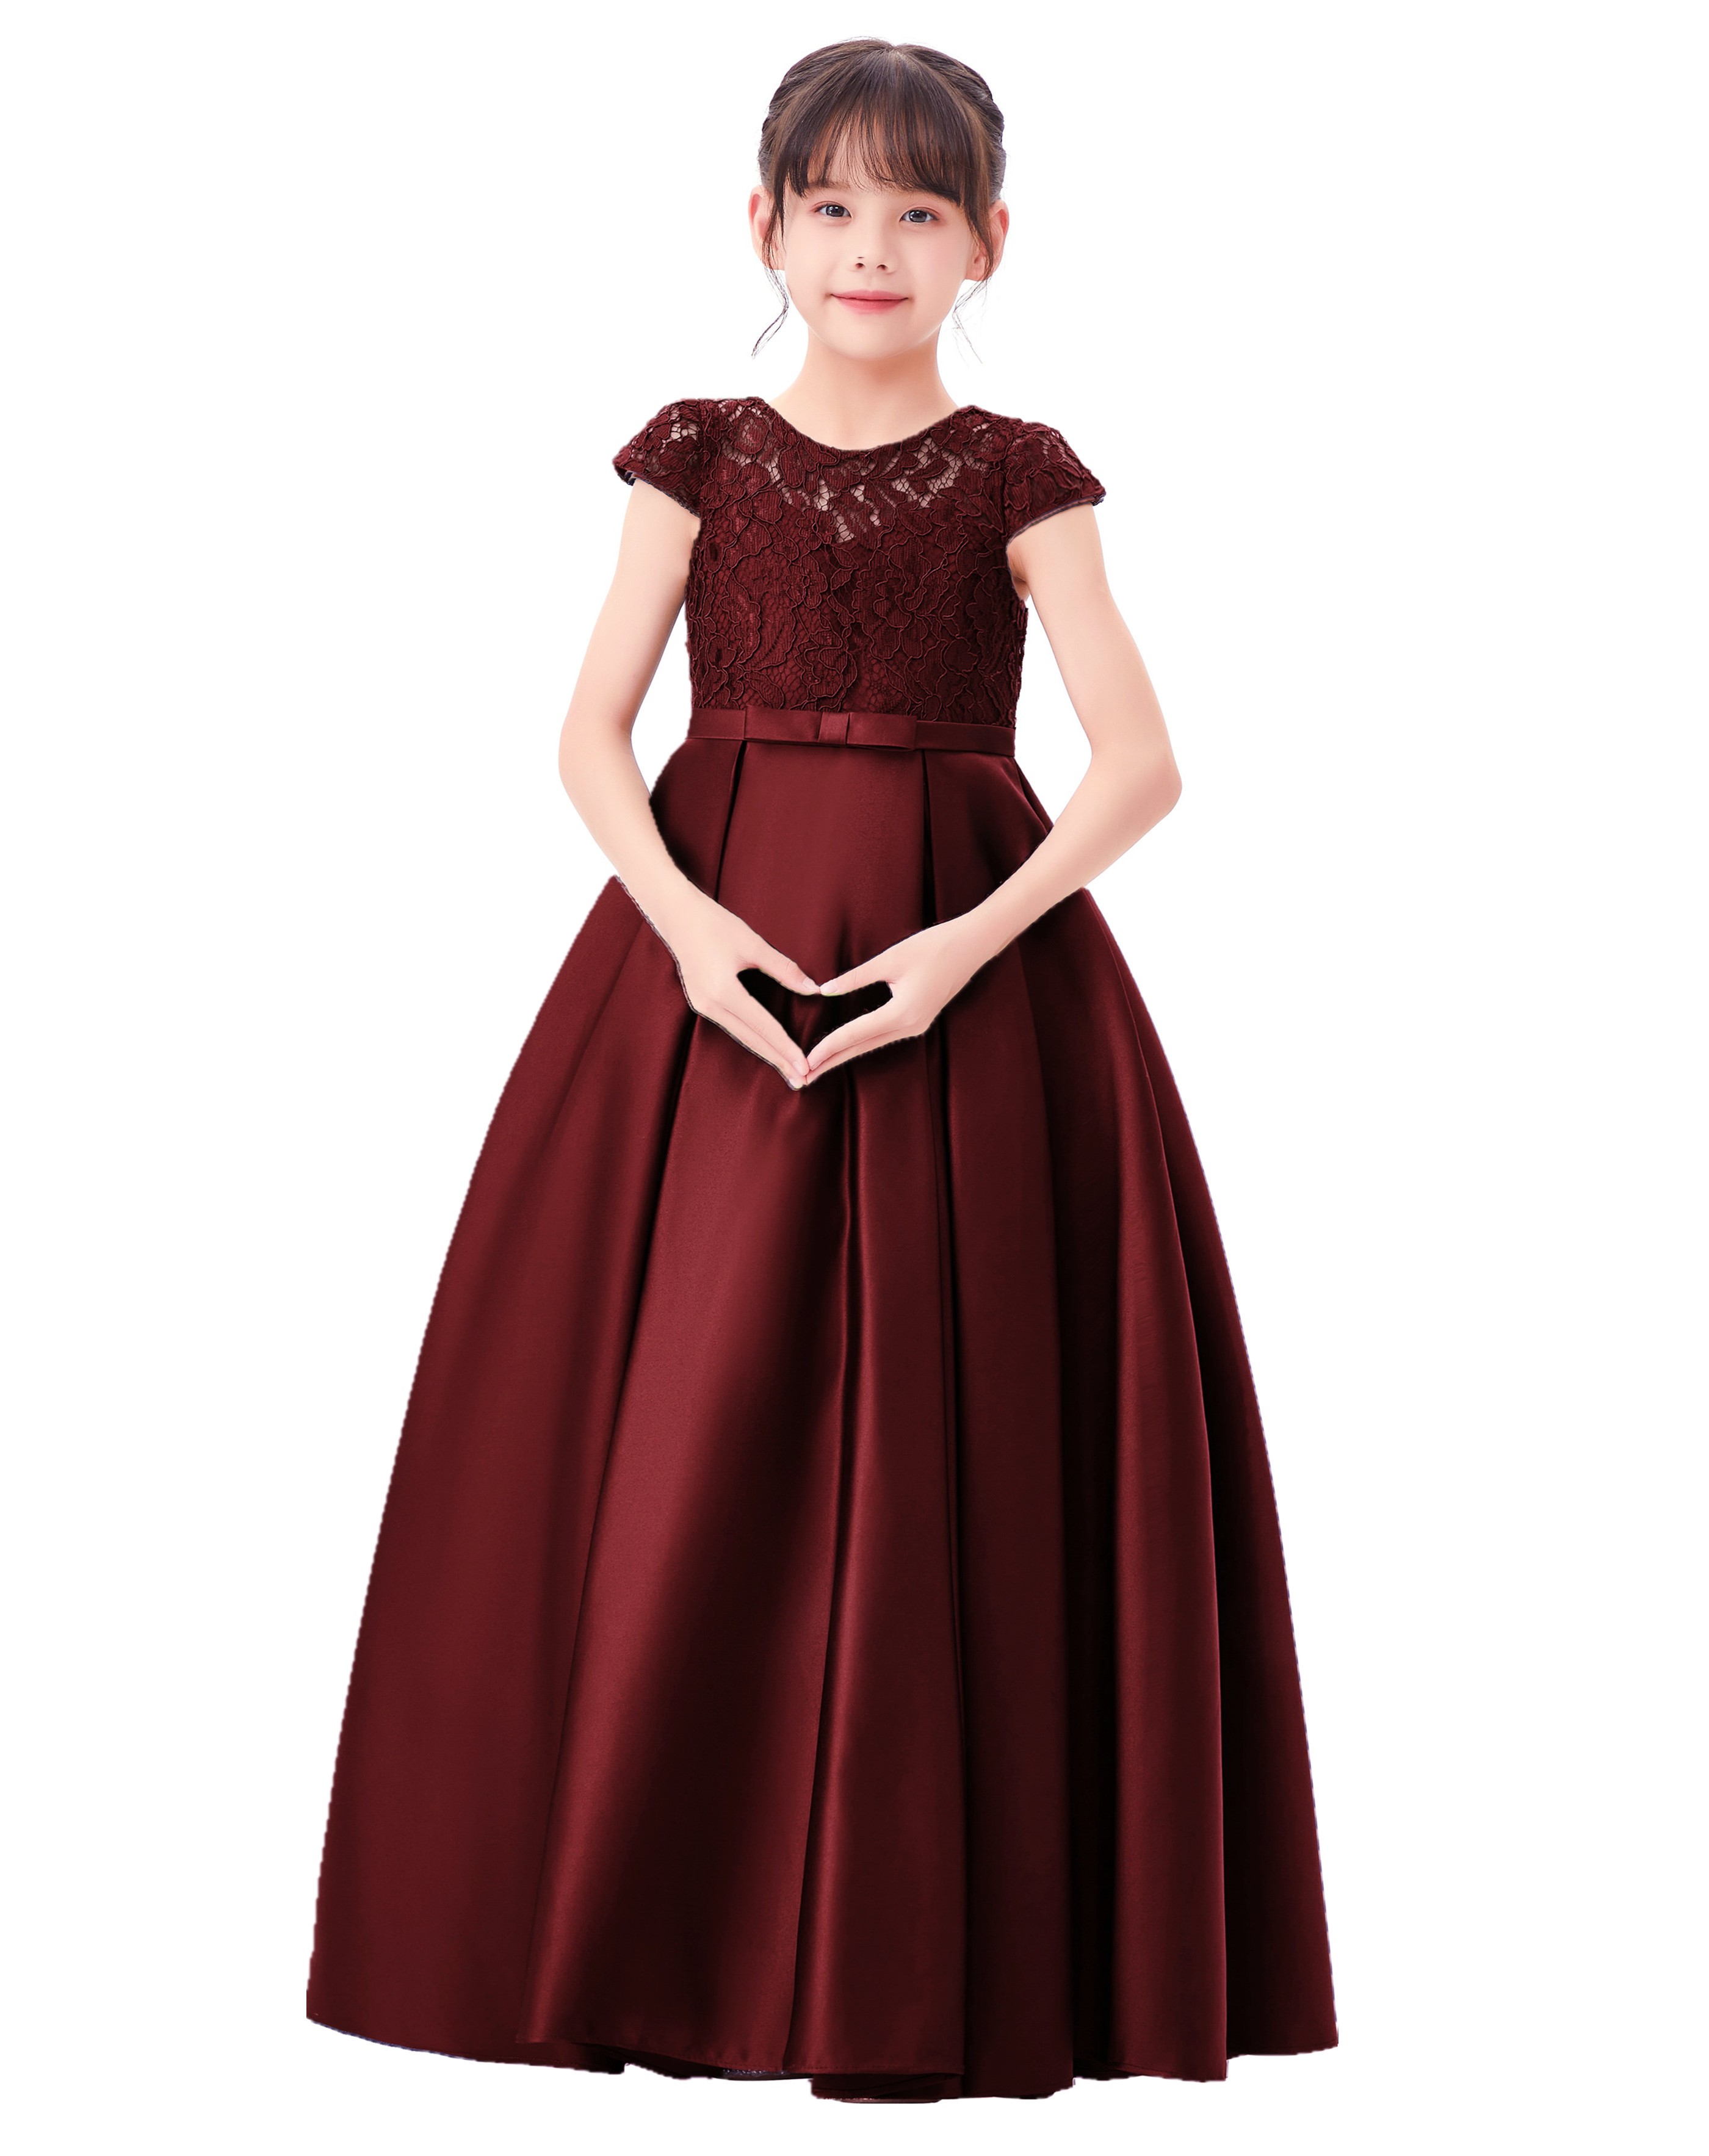 Burgundy Lace Flower Girl Dress Illusion Lace Dress Cap Sleeves L246